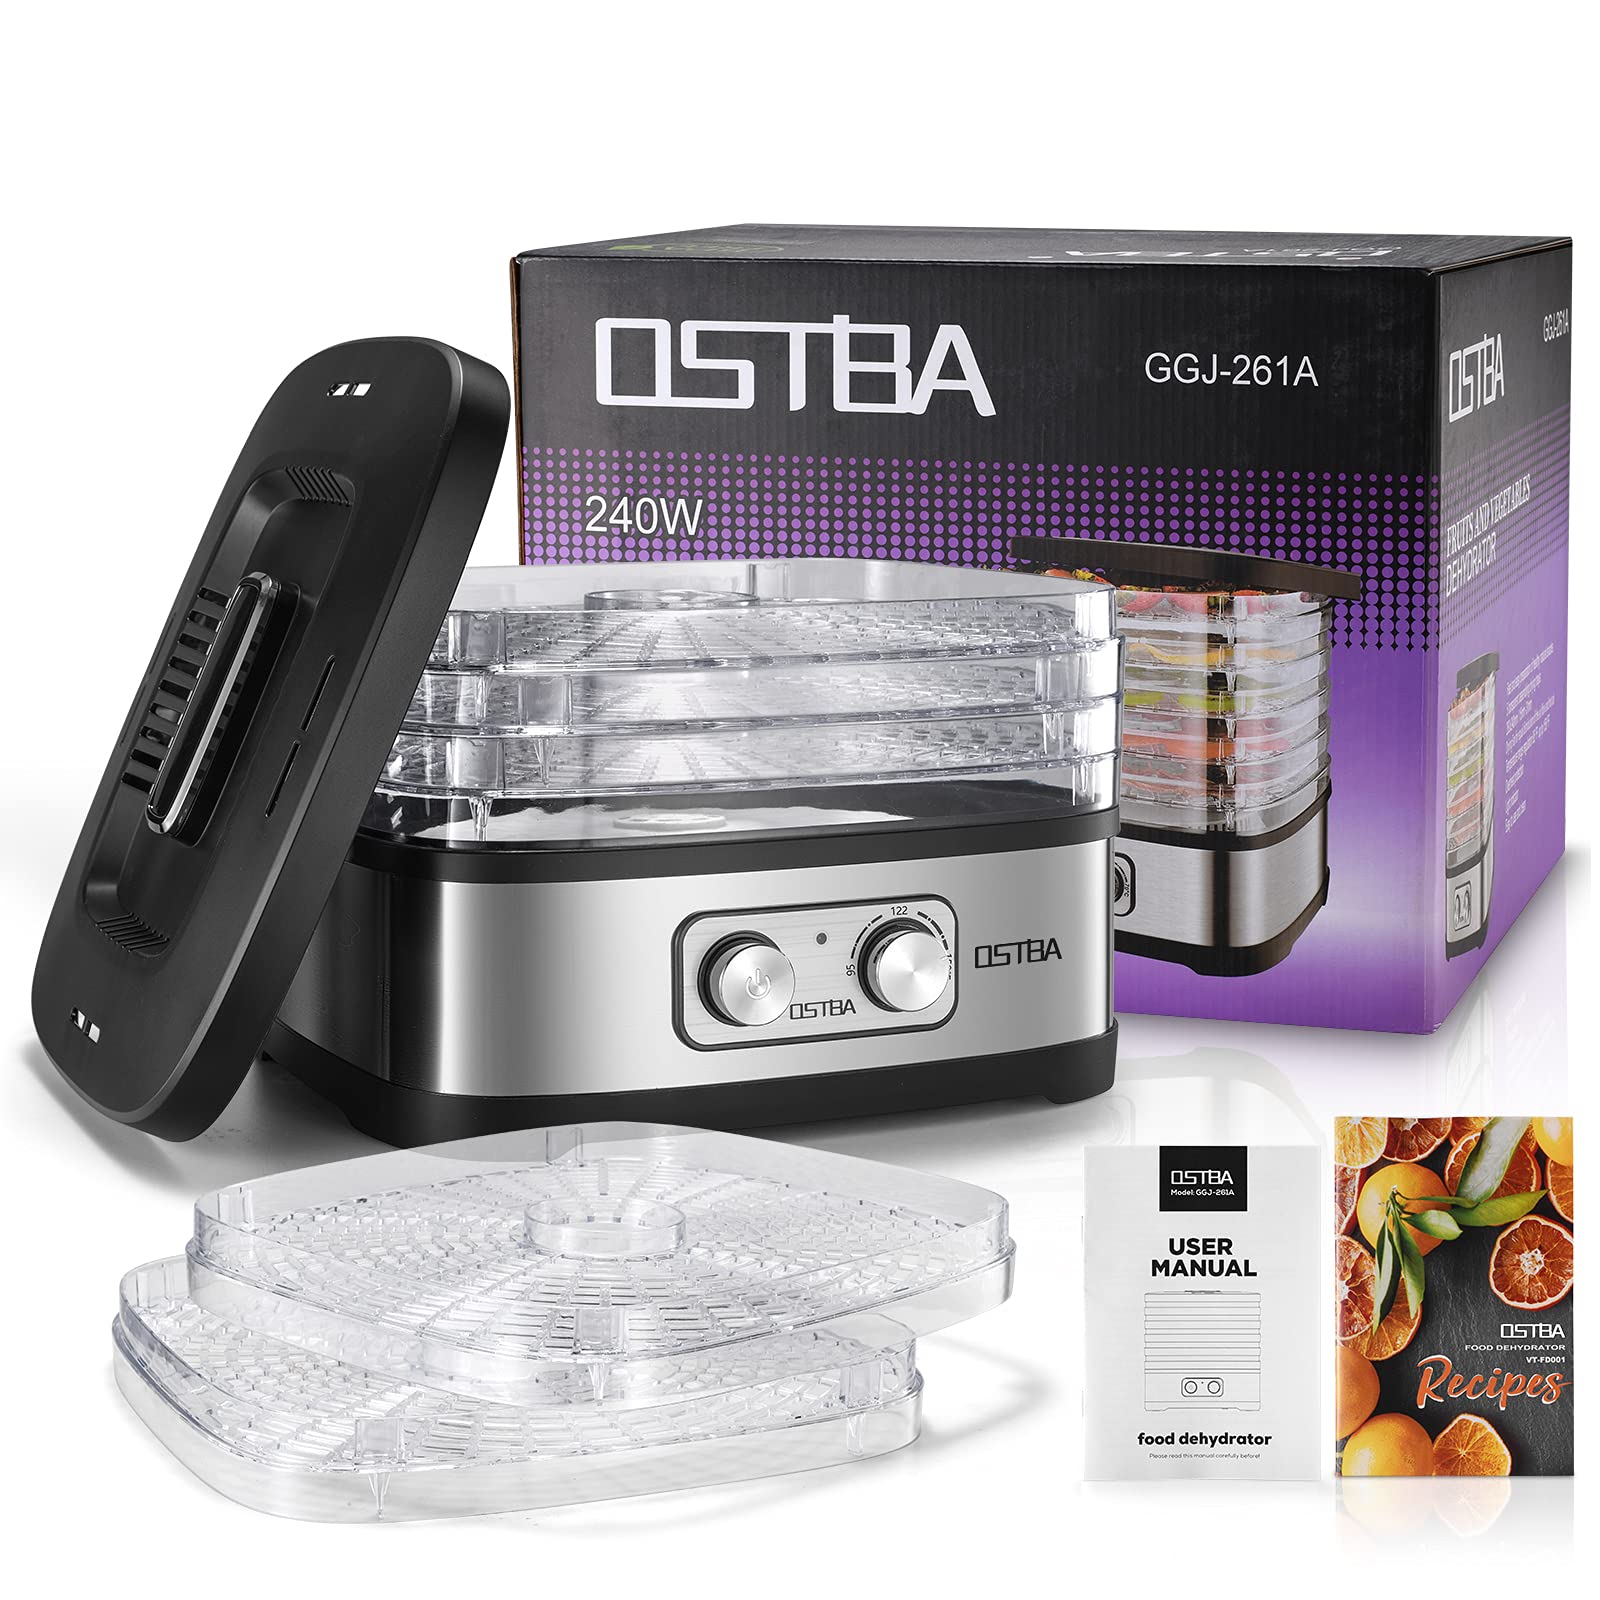 OSTBA Food Dehydrator, Dehydrator for Food and Jerky, Fruits, Herbs, Veggies, Temperature Control Electric Food Dryer Machine, 5 BPA-Free Trays Dishwasher Safe, 240W, Recipe Book Included